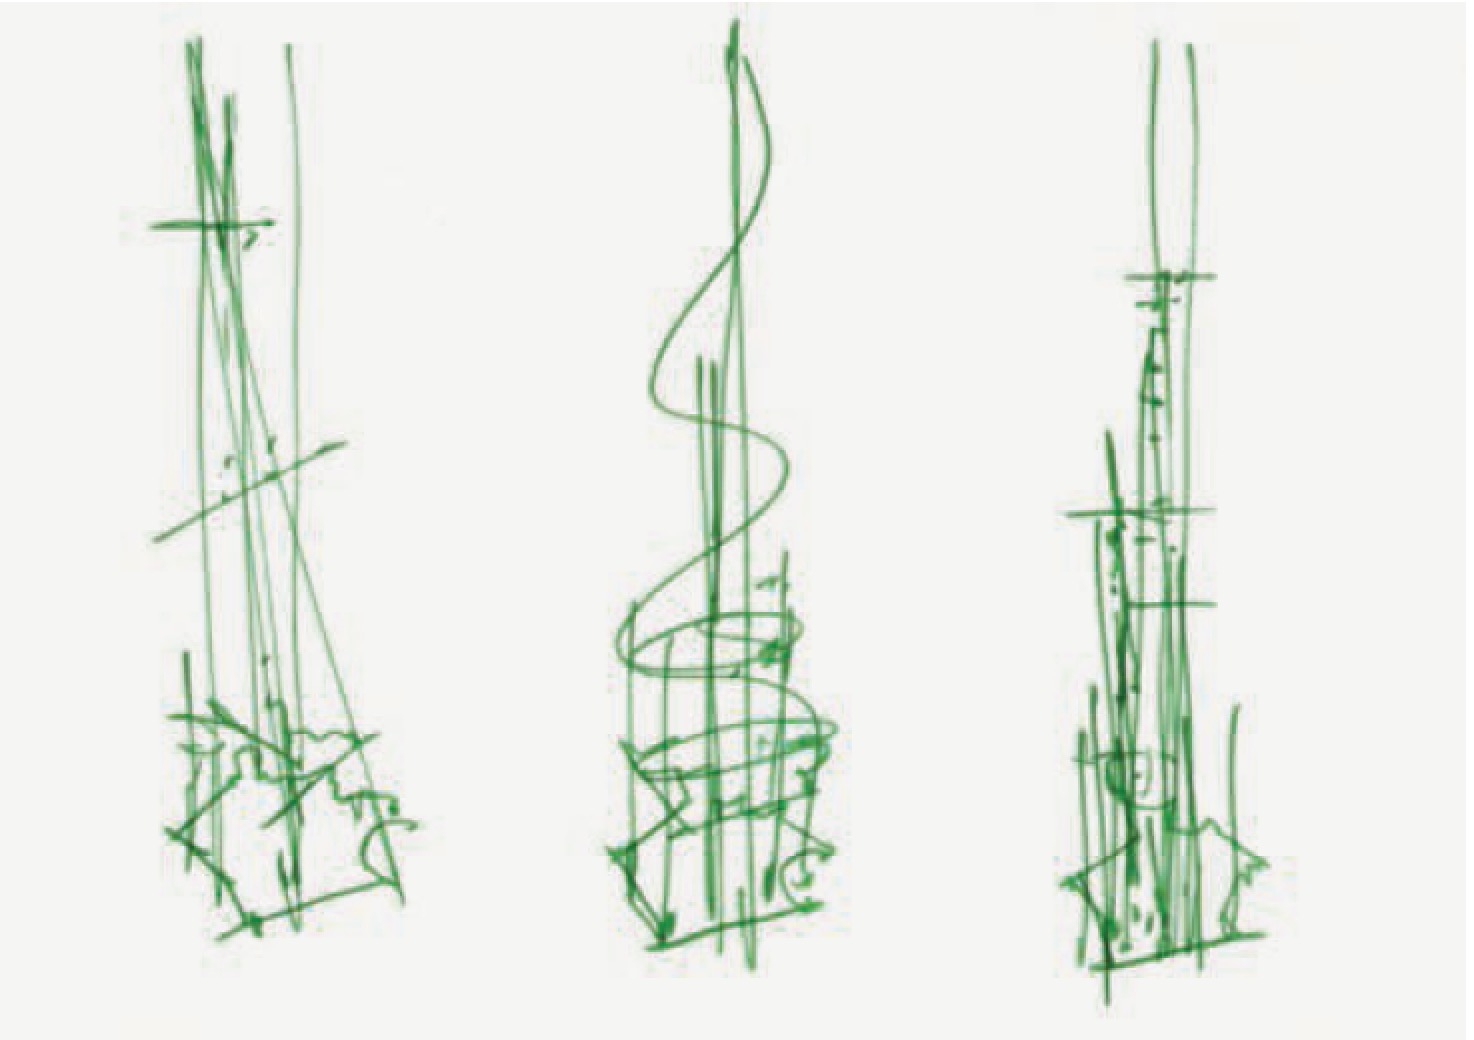 Renzo Piano's original sketches for The Shard as featured in Drawing Architecture